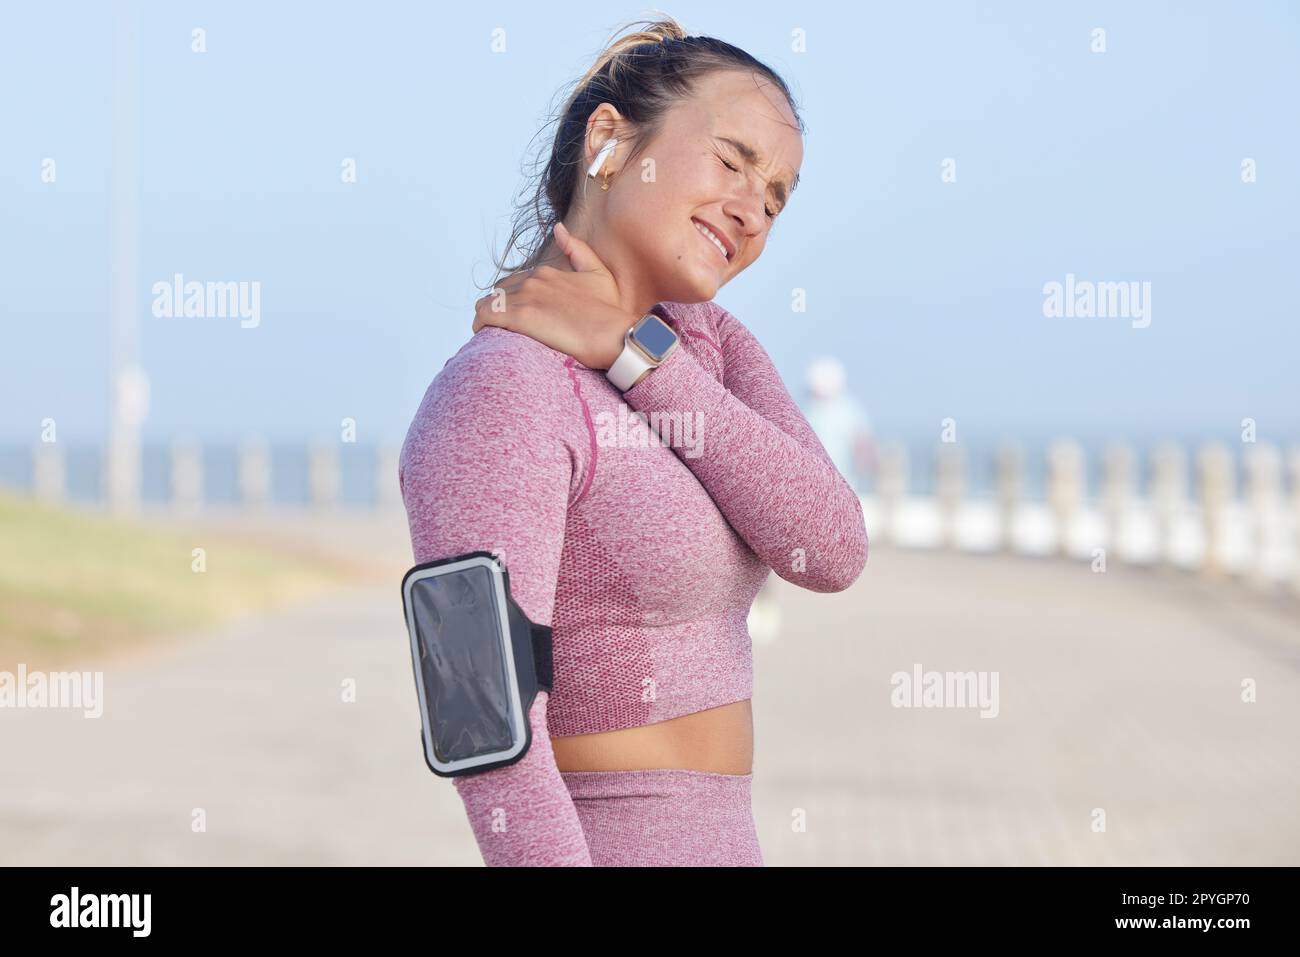 Fitness runner, injury and woman with neck pain problem from workout, outdoor running or exercise. Sky, athlete training accident or sports girl with muscle strain, medical crisis or health emergency Stock Photo